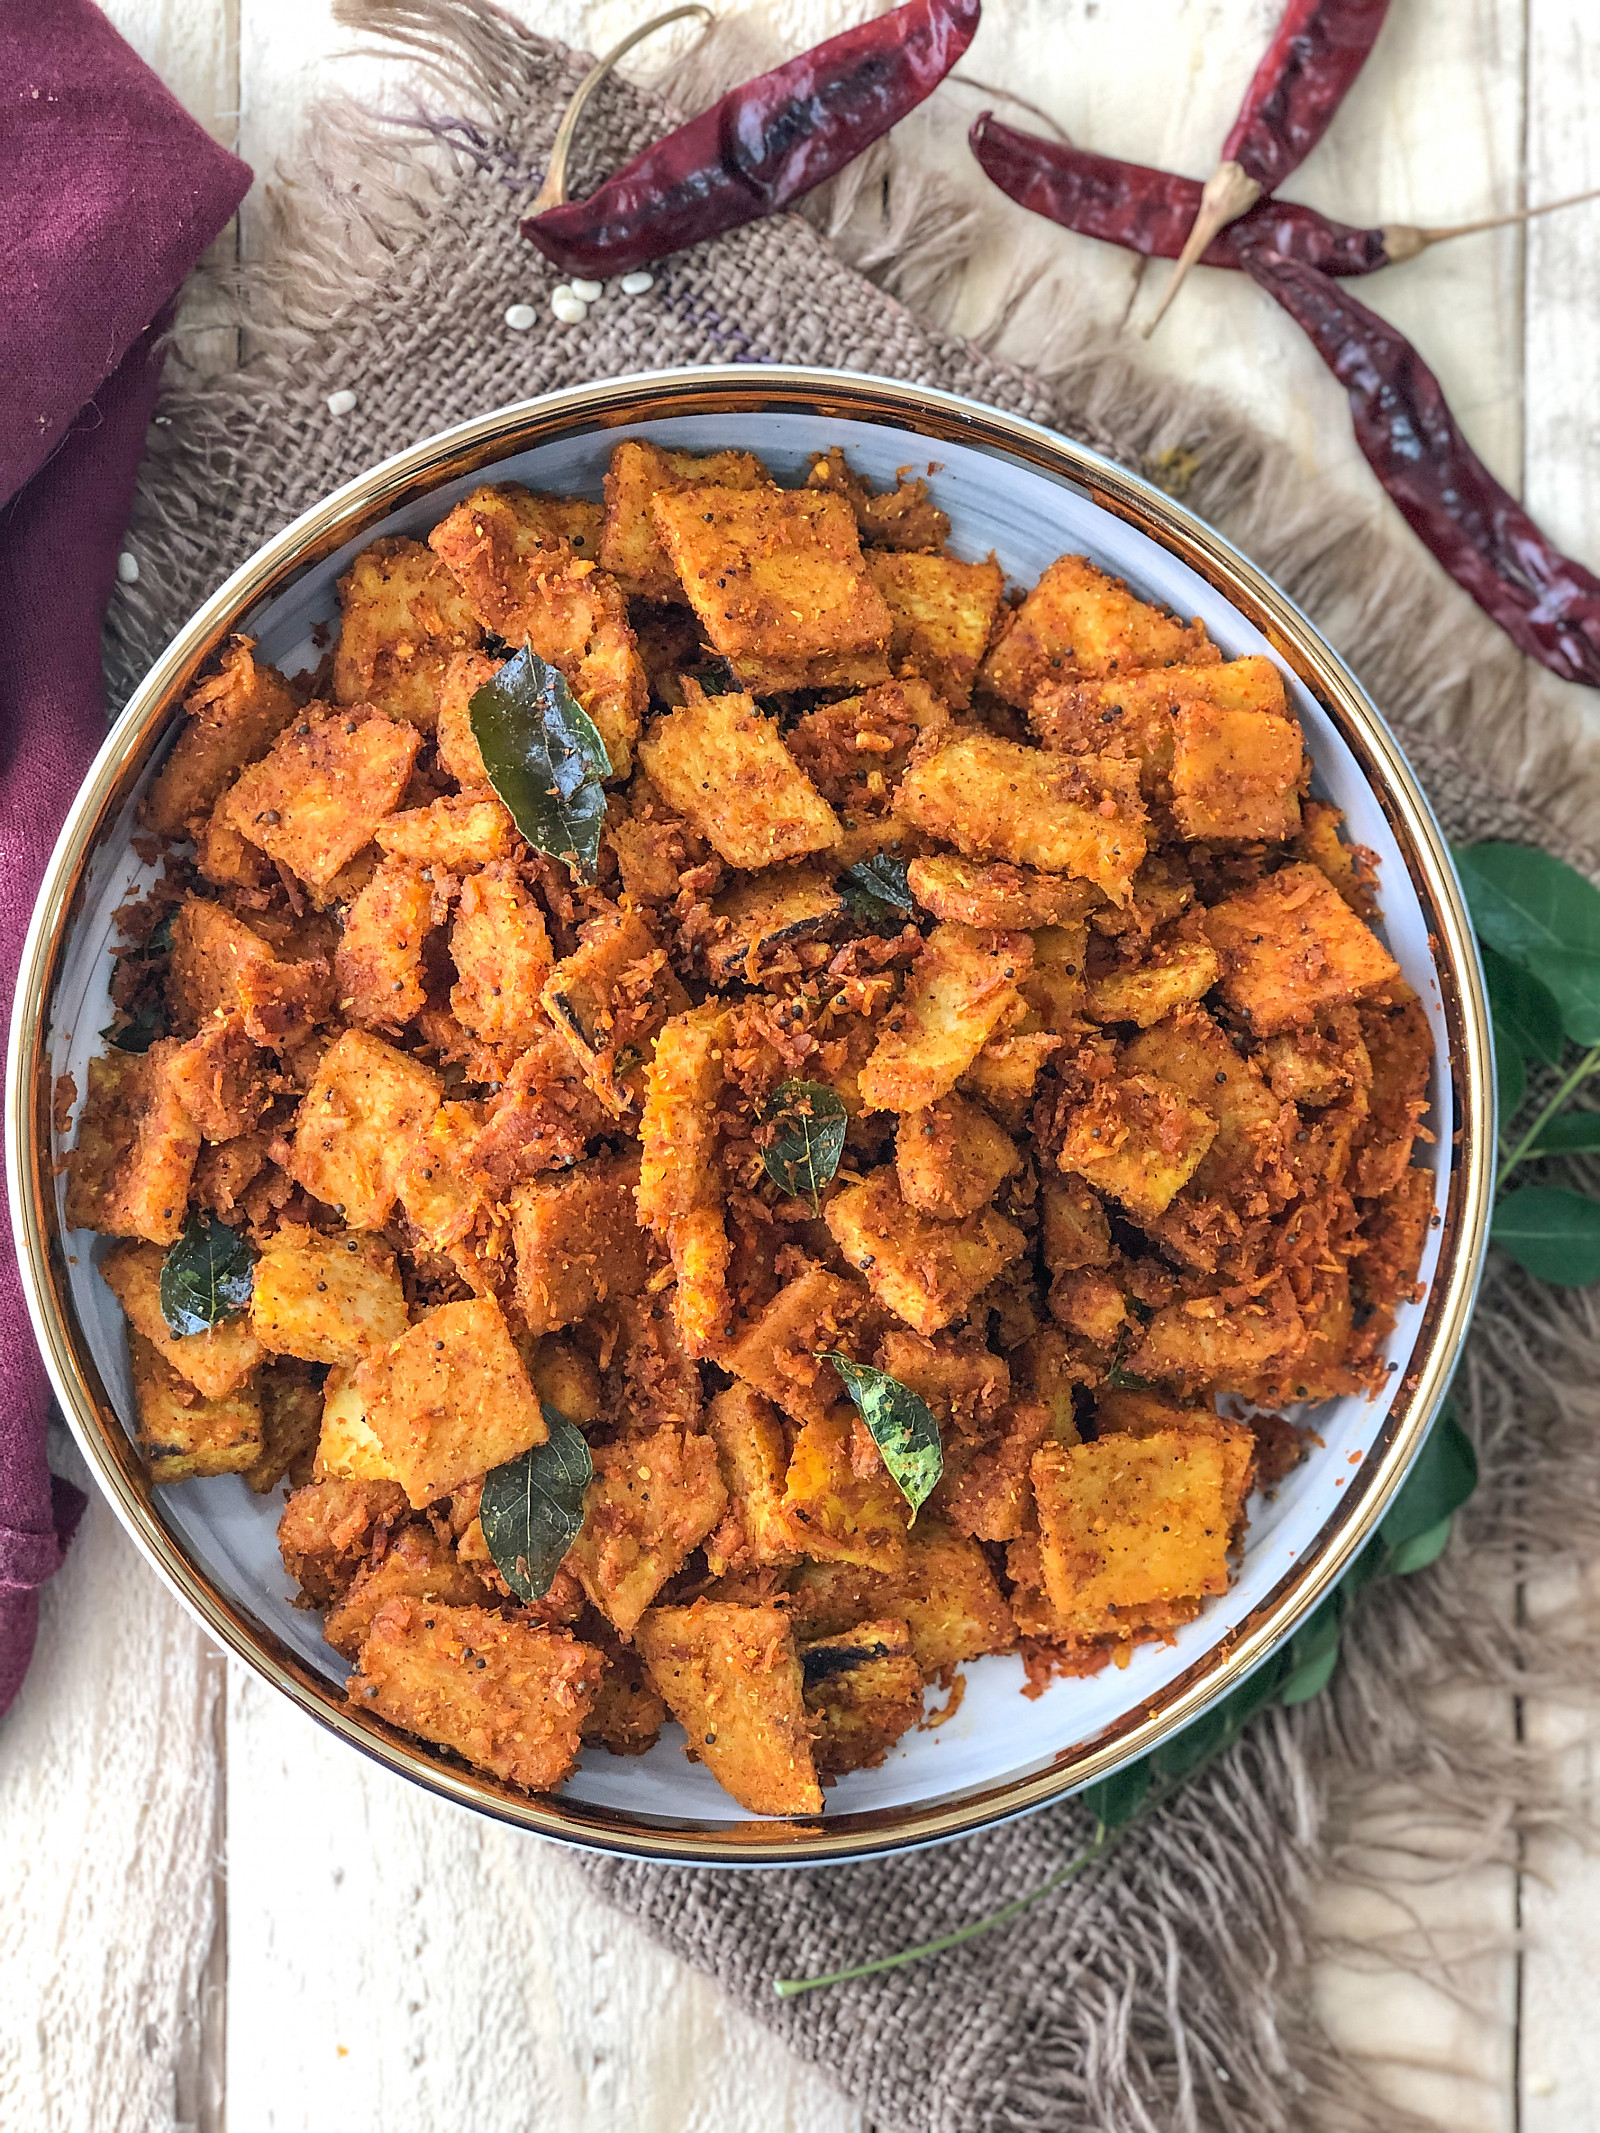 South Indian Spicy Roasted Yam